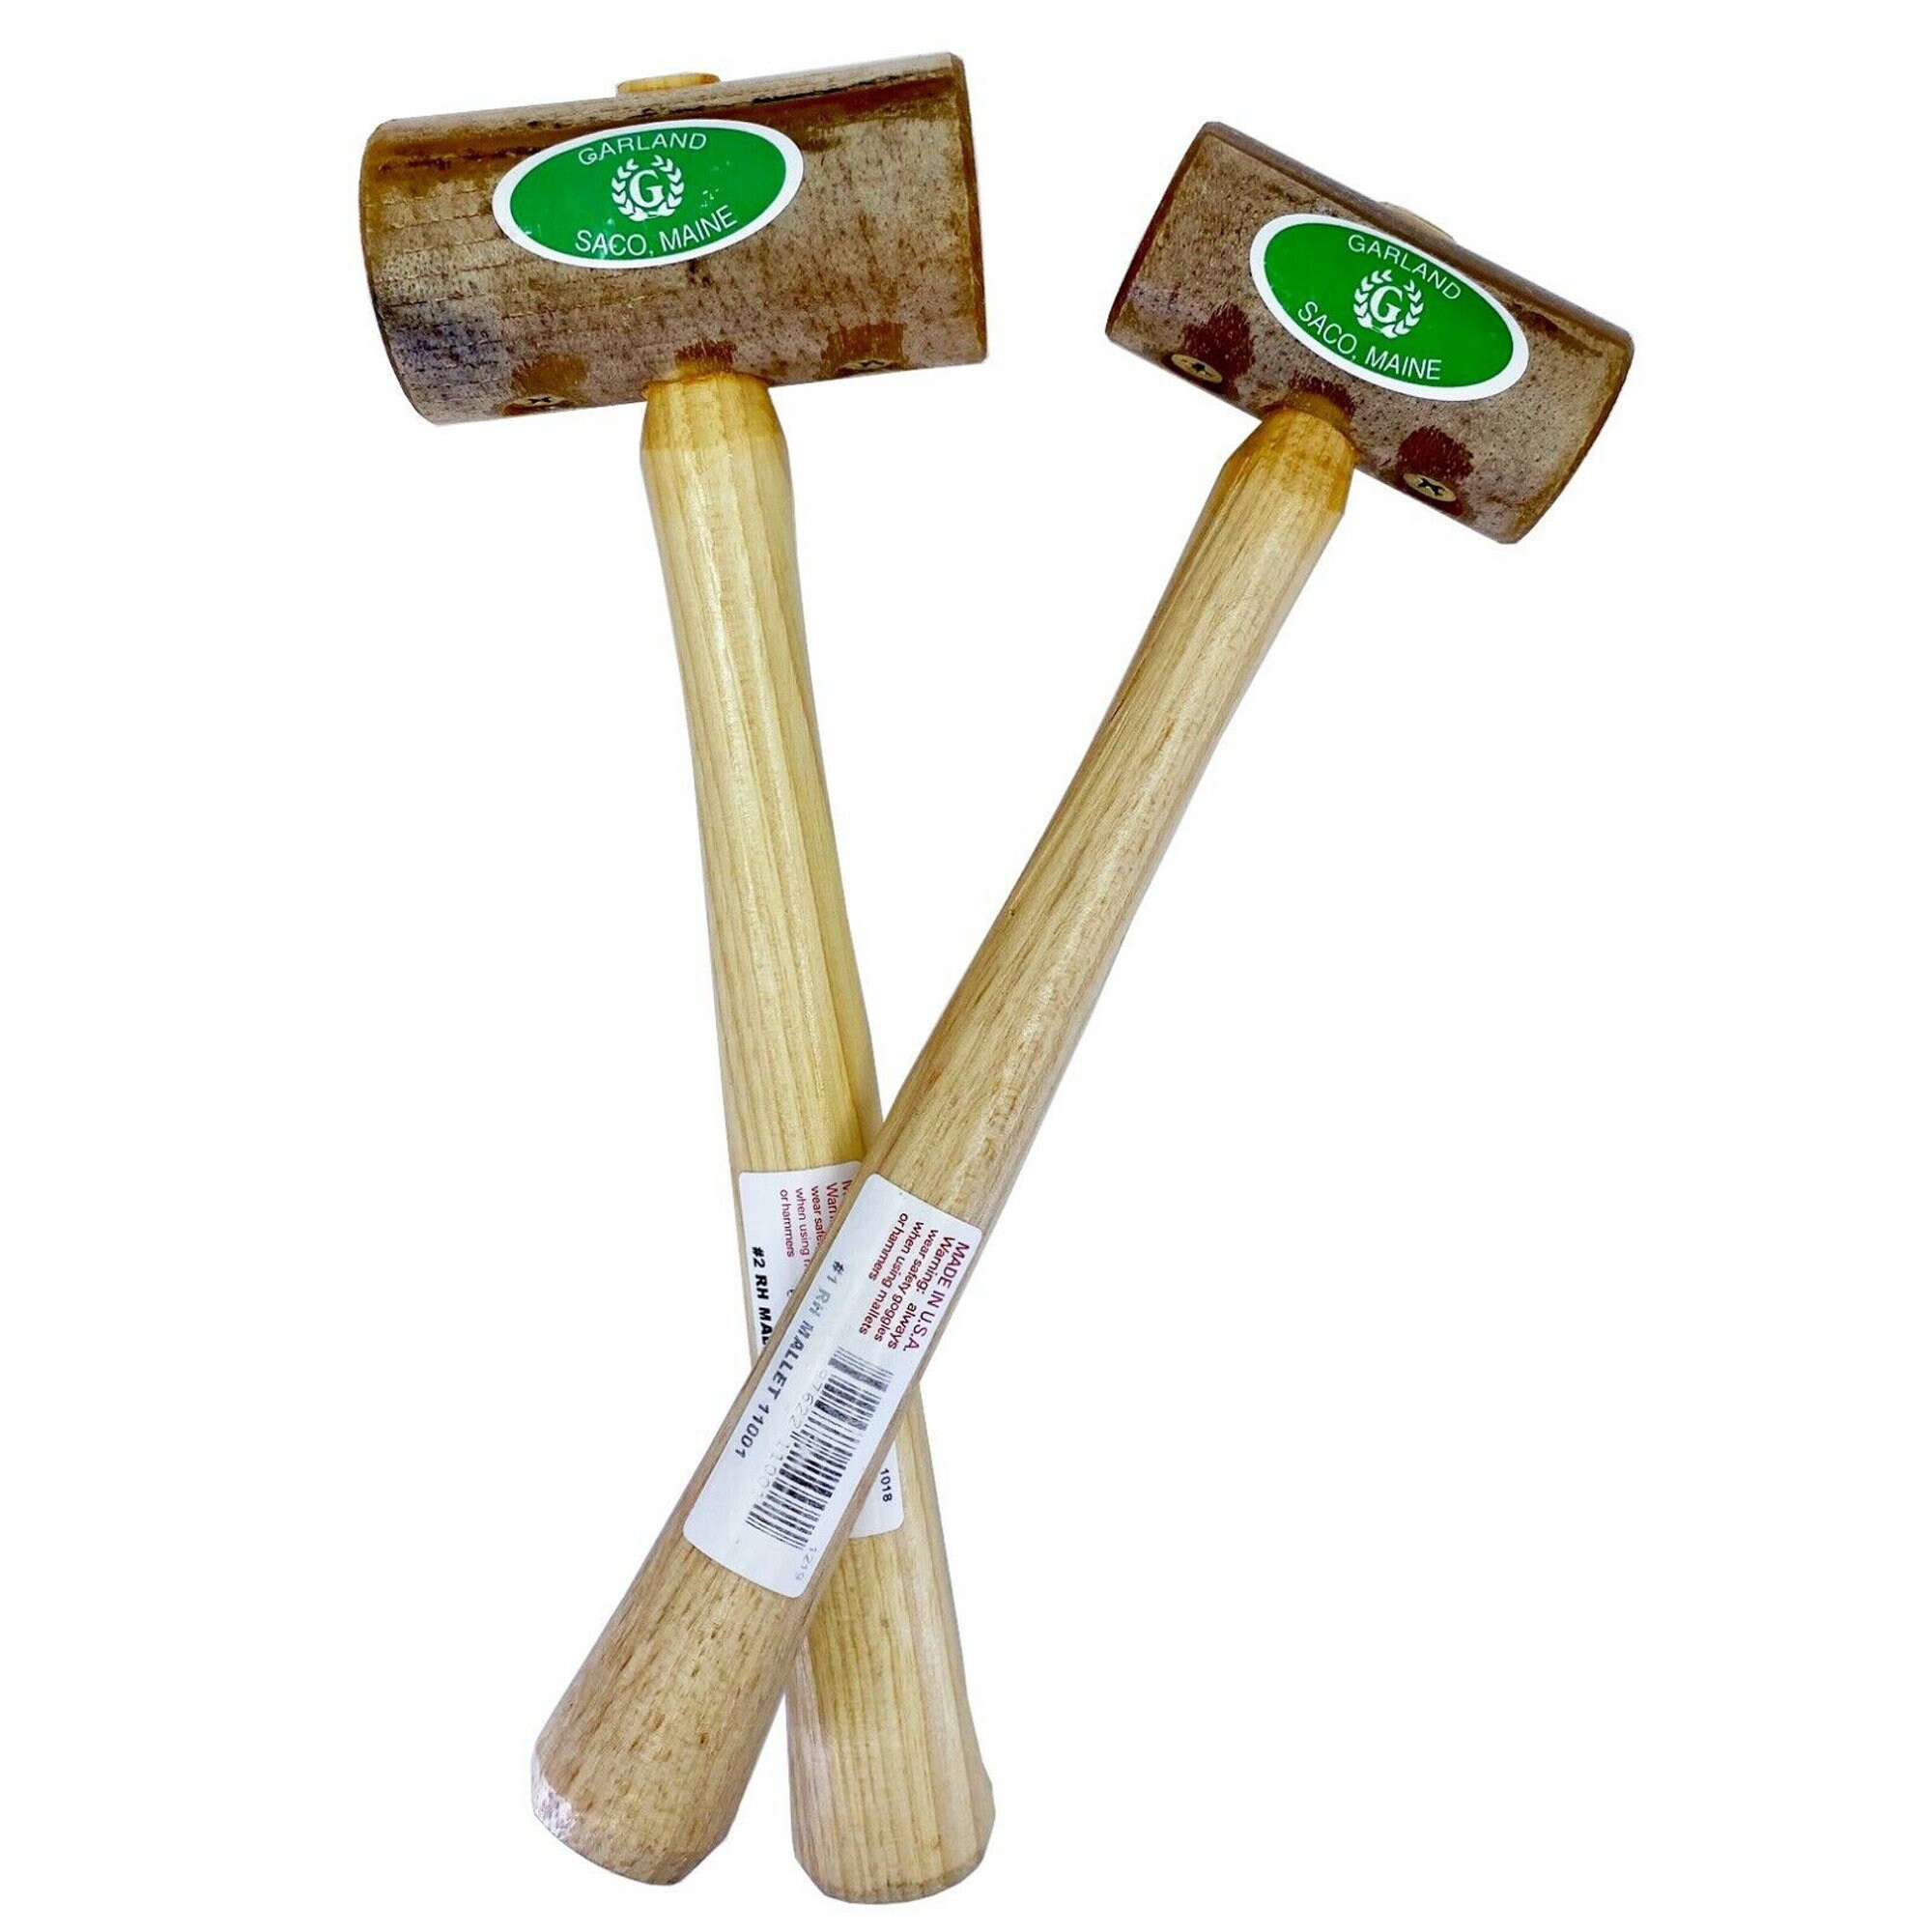 Garland 11008 Rawhide Weighted Mallet, Size-8